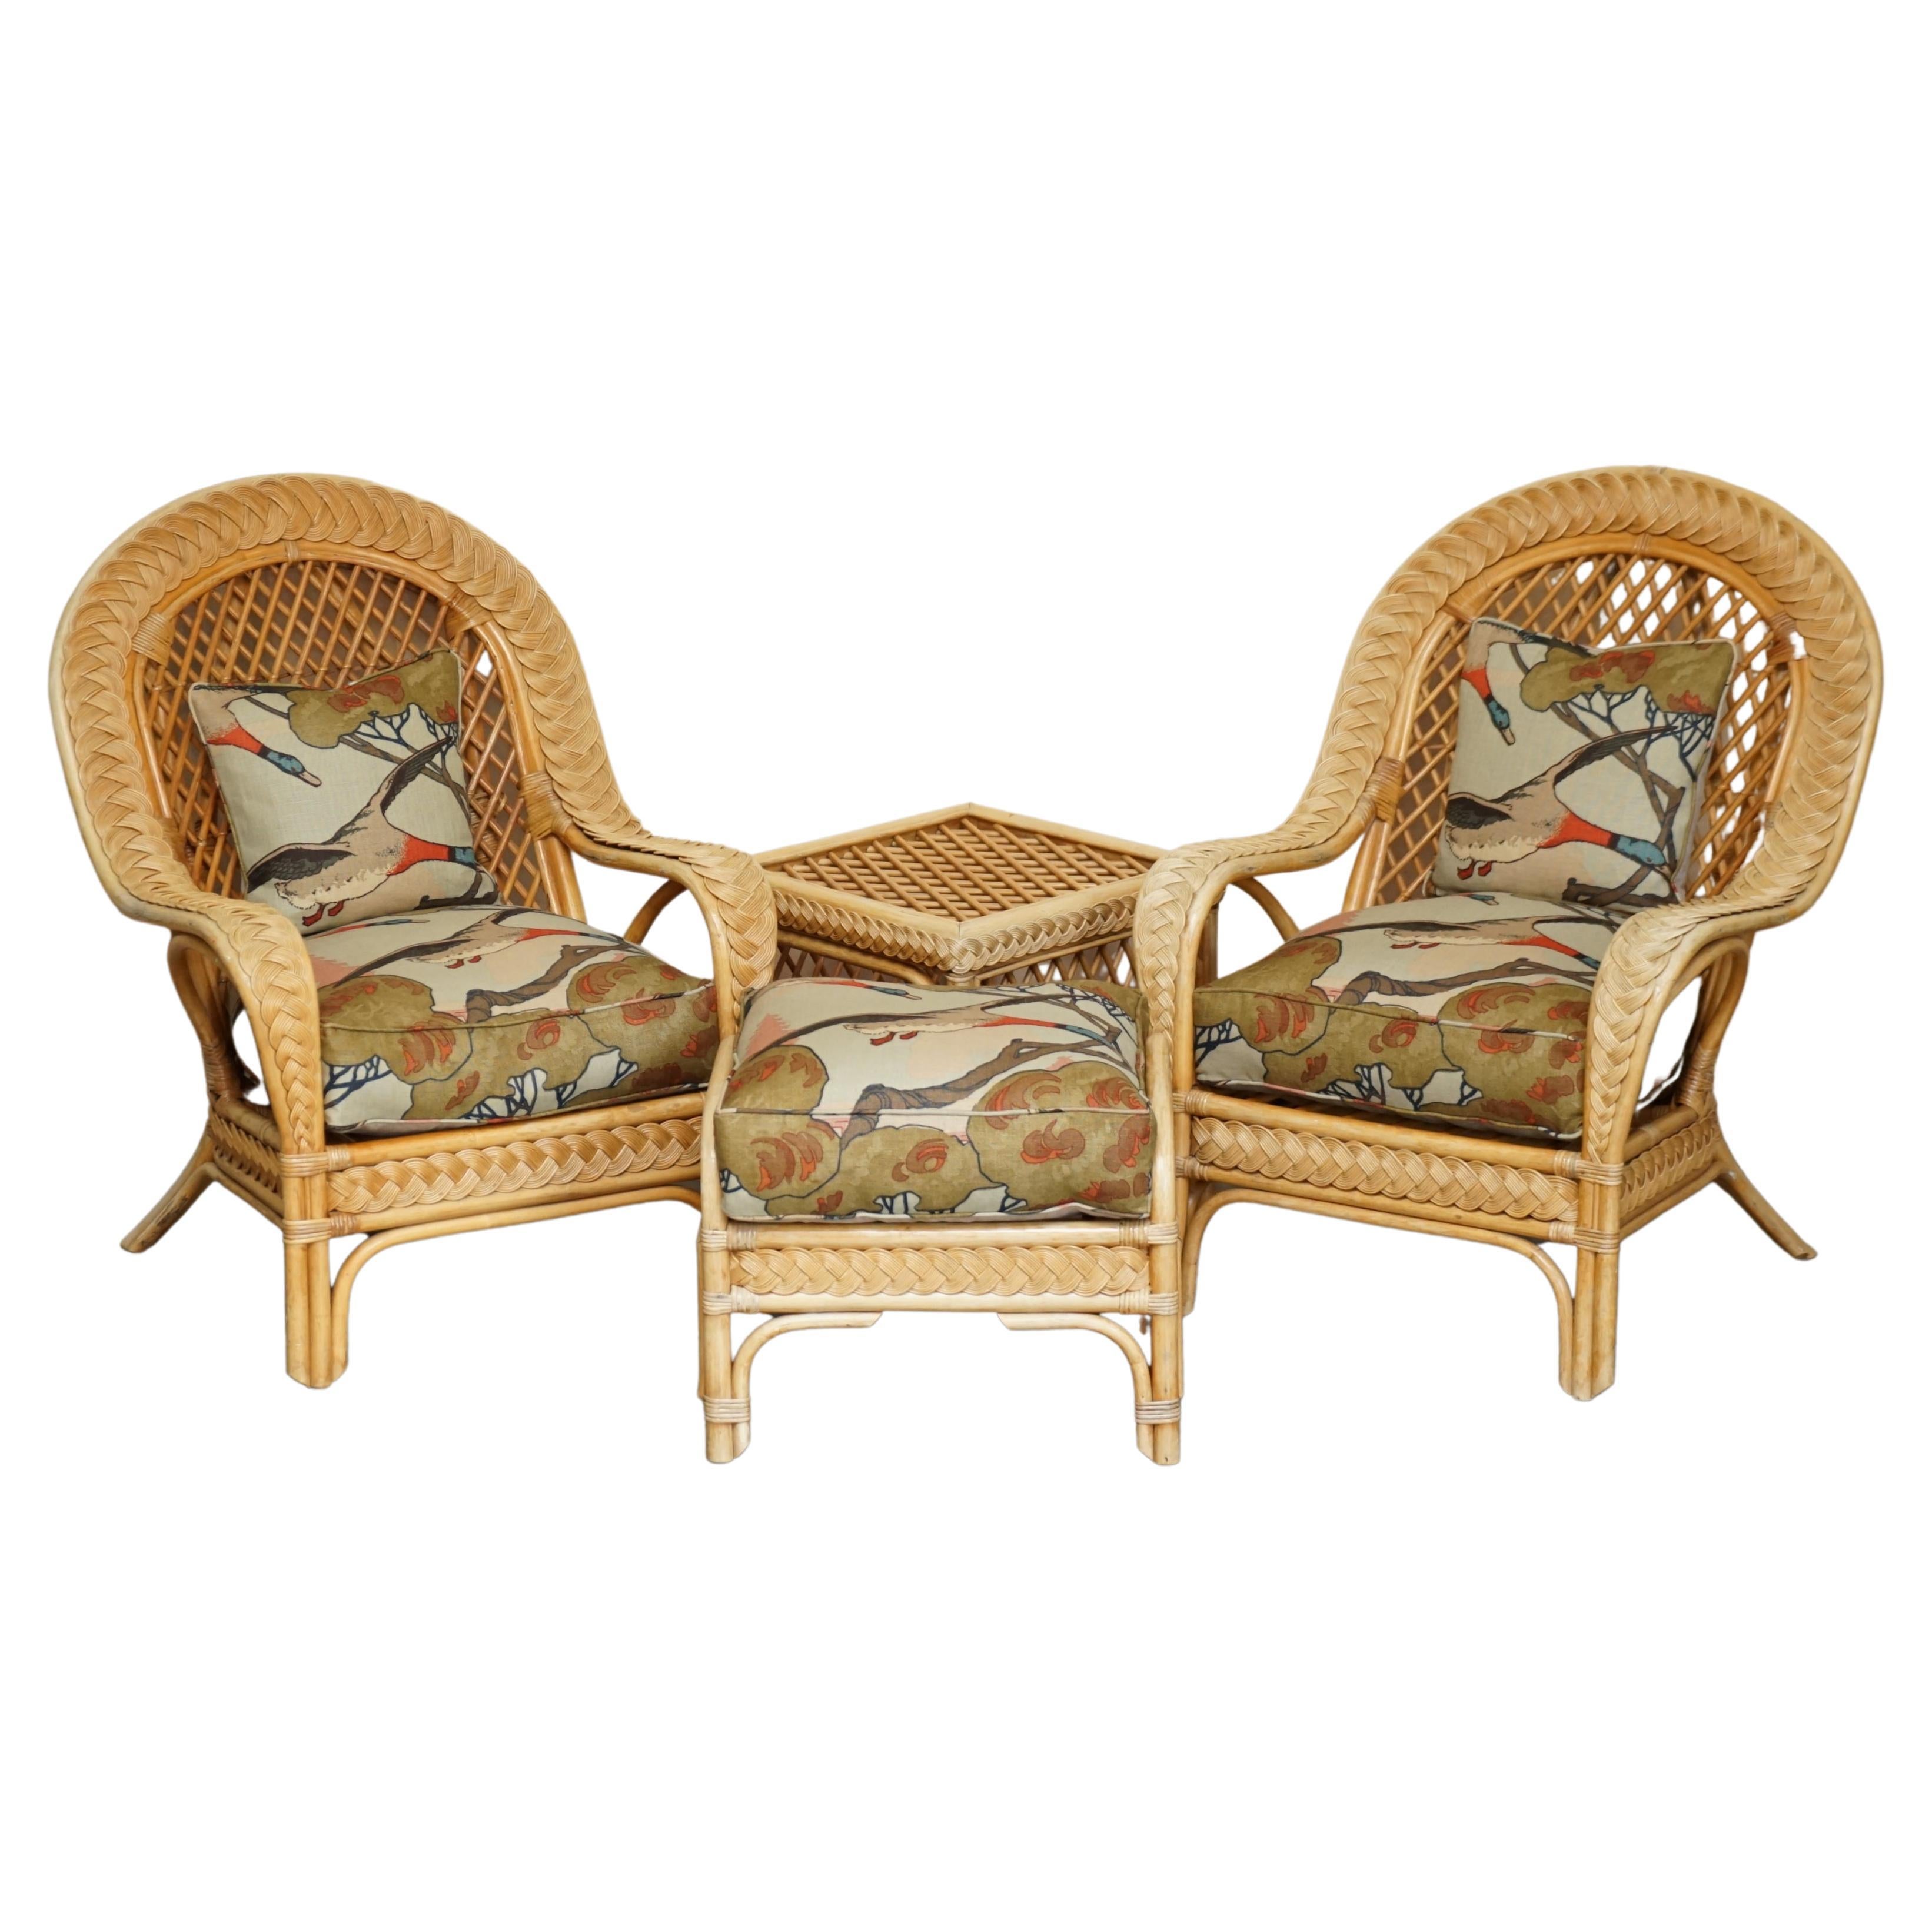 WICKER ARMCHAIRS STOOL TABLE SUITE GEPOLSTERT MIT MULBERRY FLYING DUCKS FABRIC